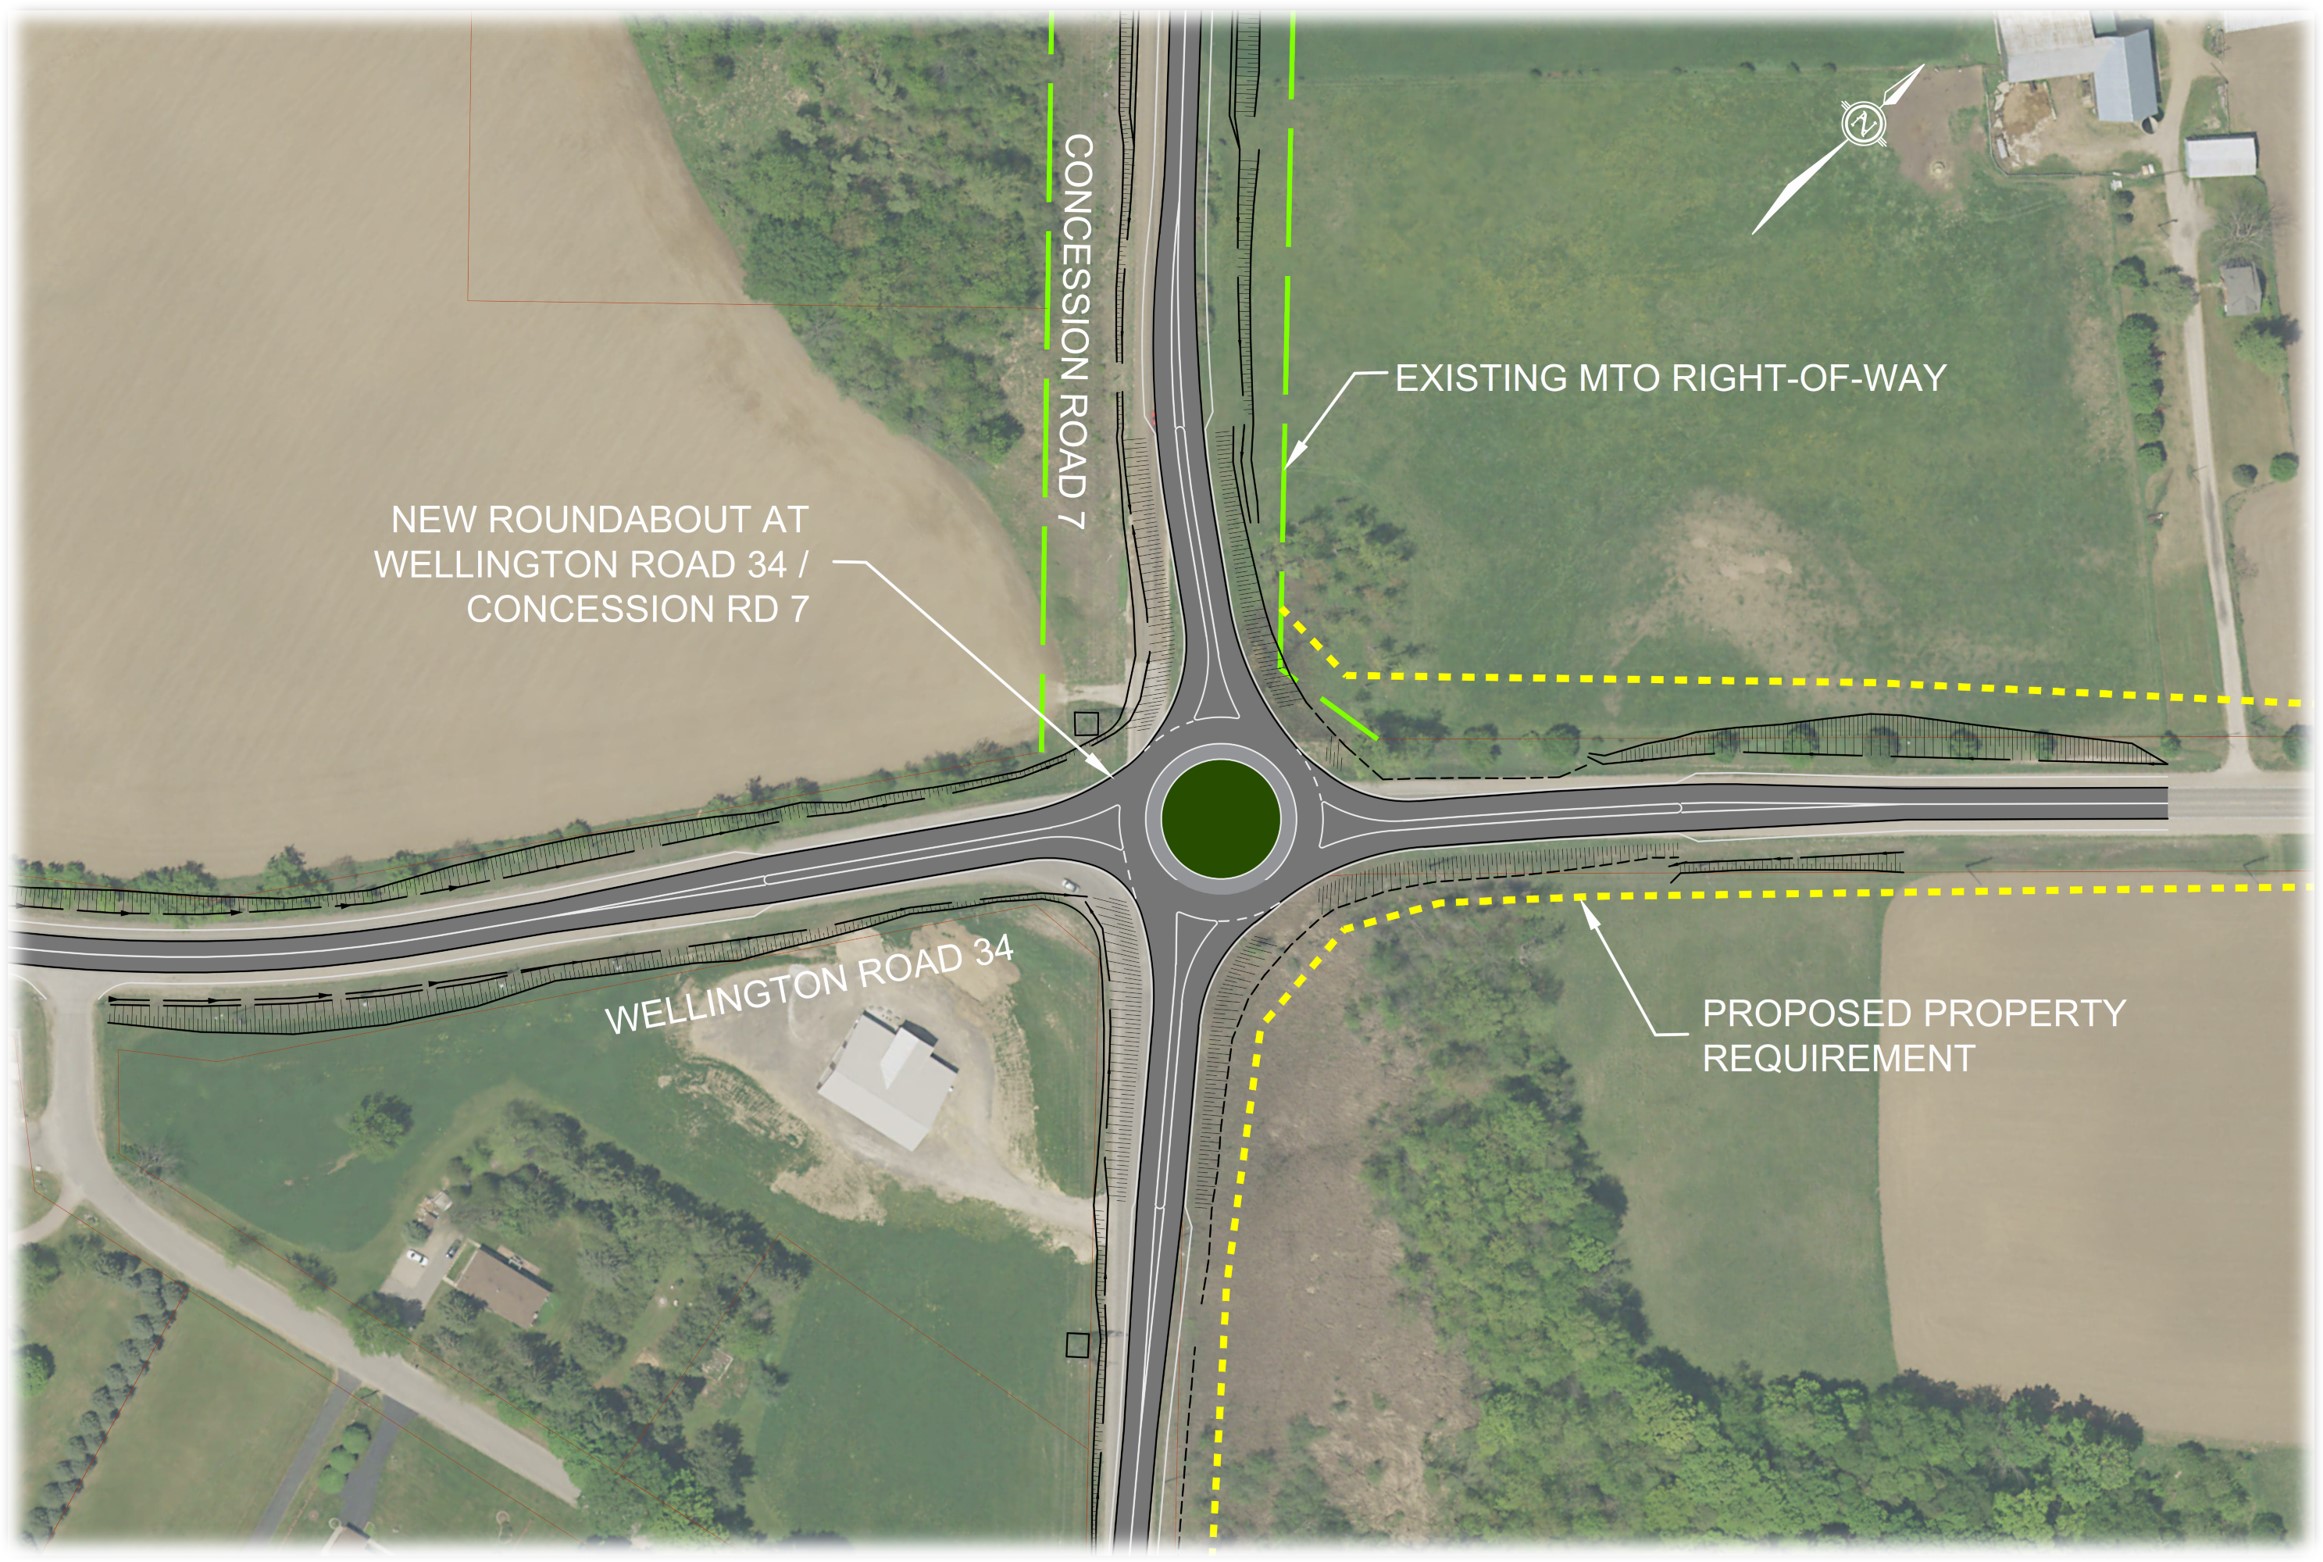 Aerial map of Wellington Road 34 at Concession Road 7 showing the recommended Roundabout, existing MTO right-of-way and proposed property requirements